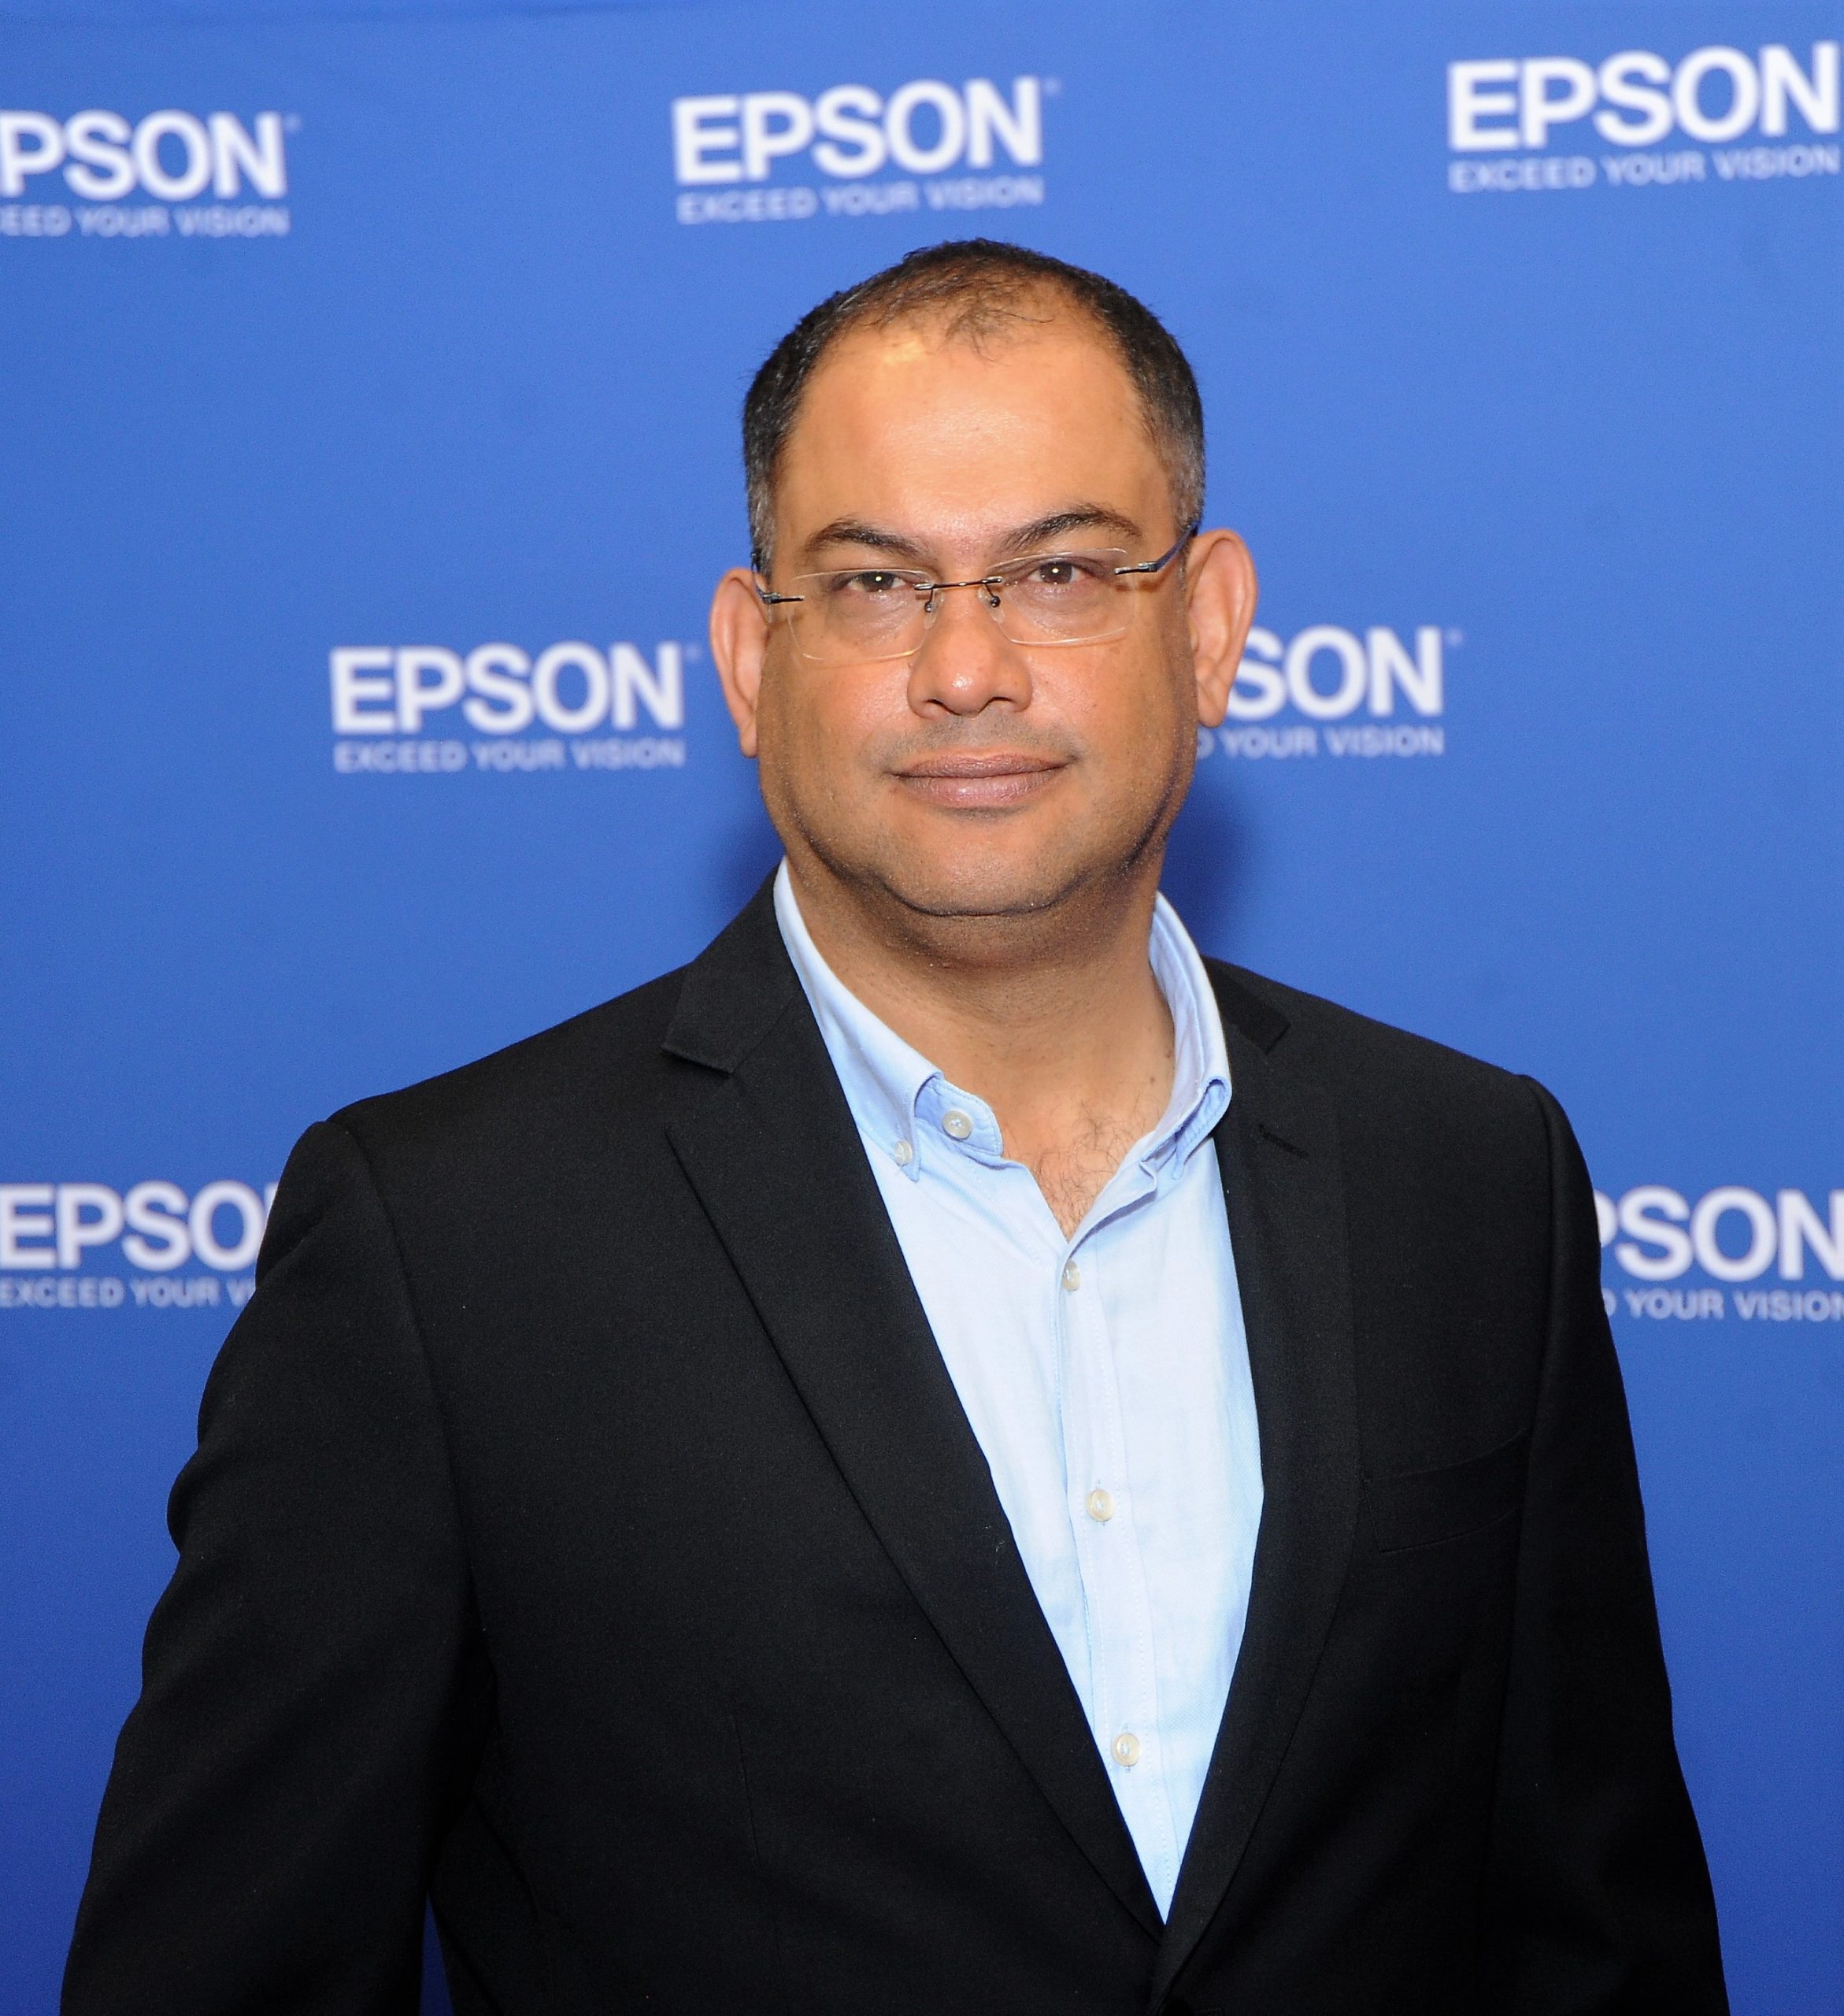 Mukesh Bector, Epson’s Regional Head for East and West Africa